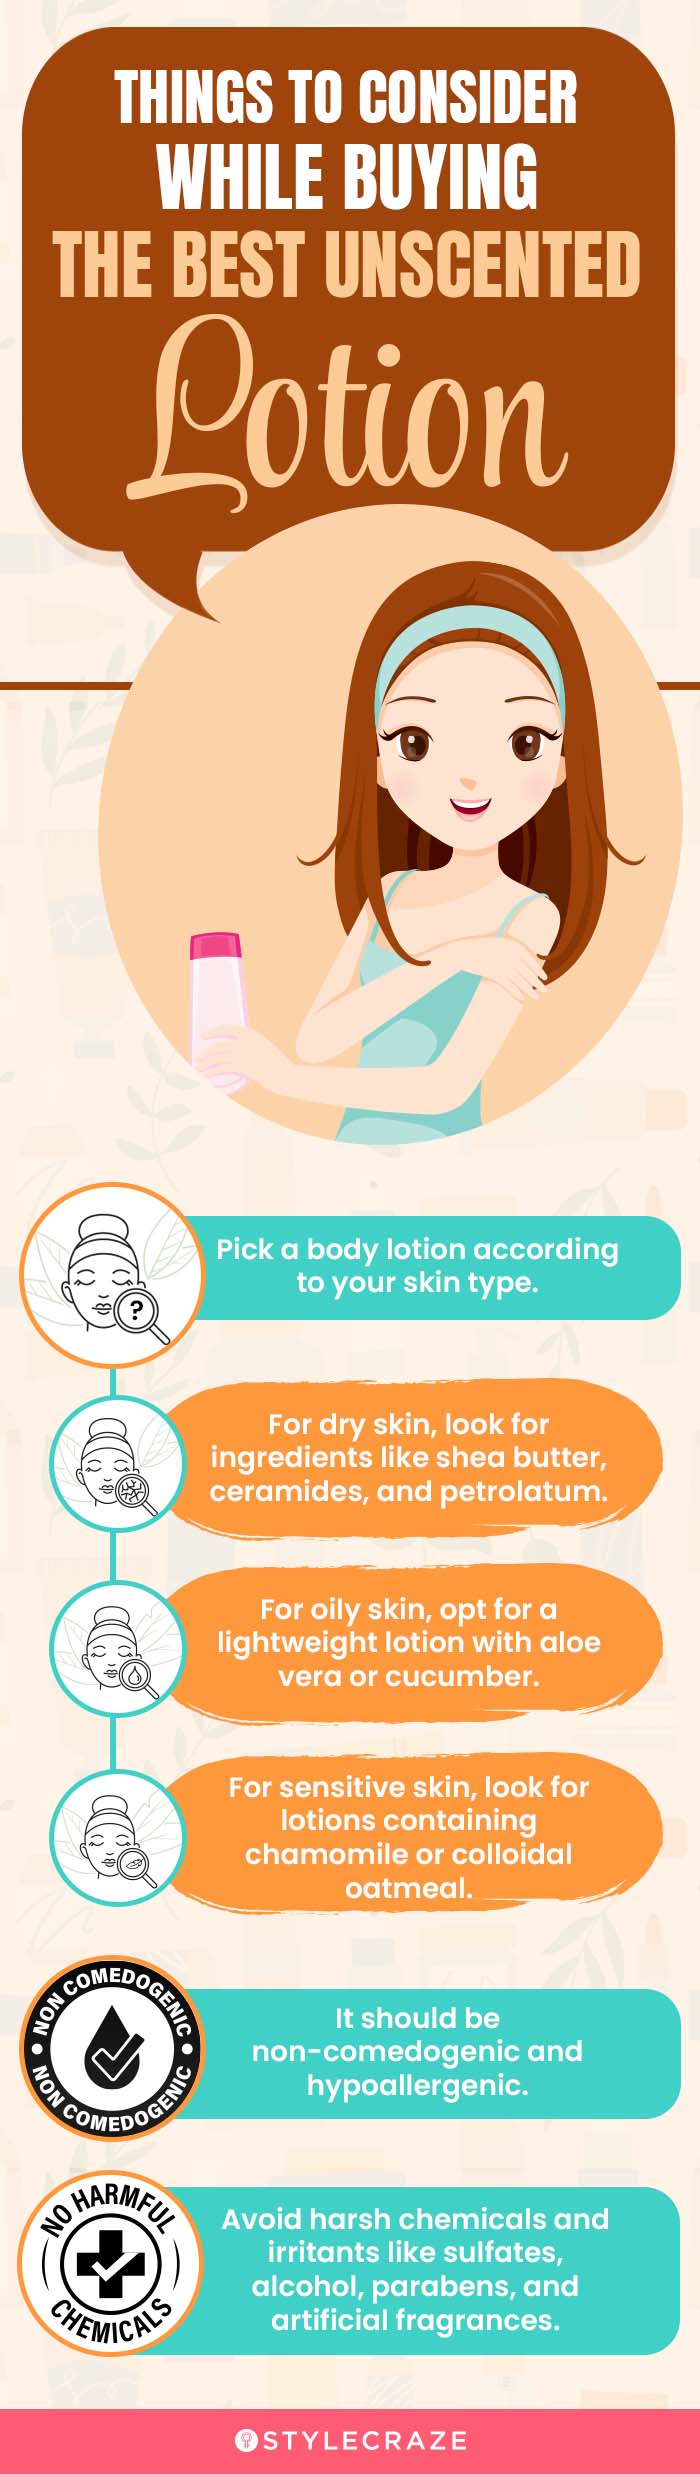 Things to consider while buying the best unscented lotion [infographic]